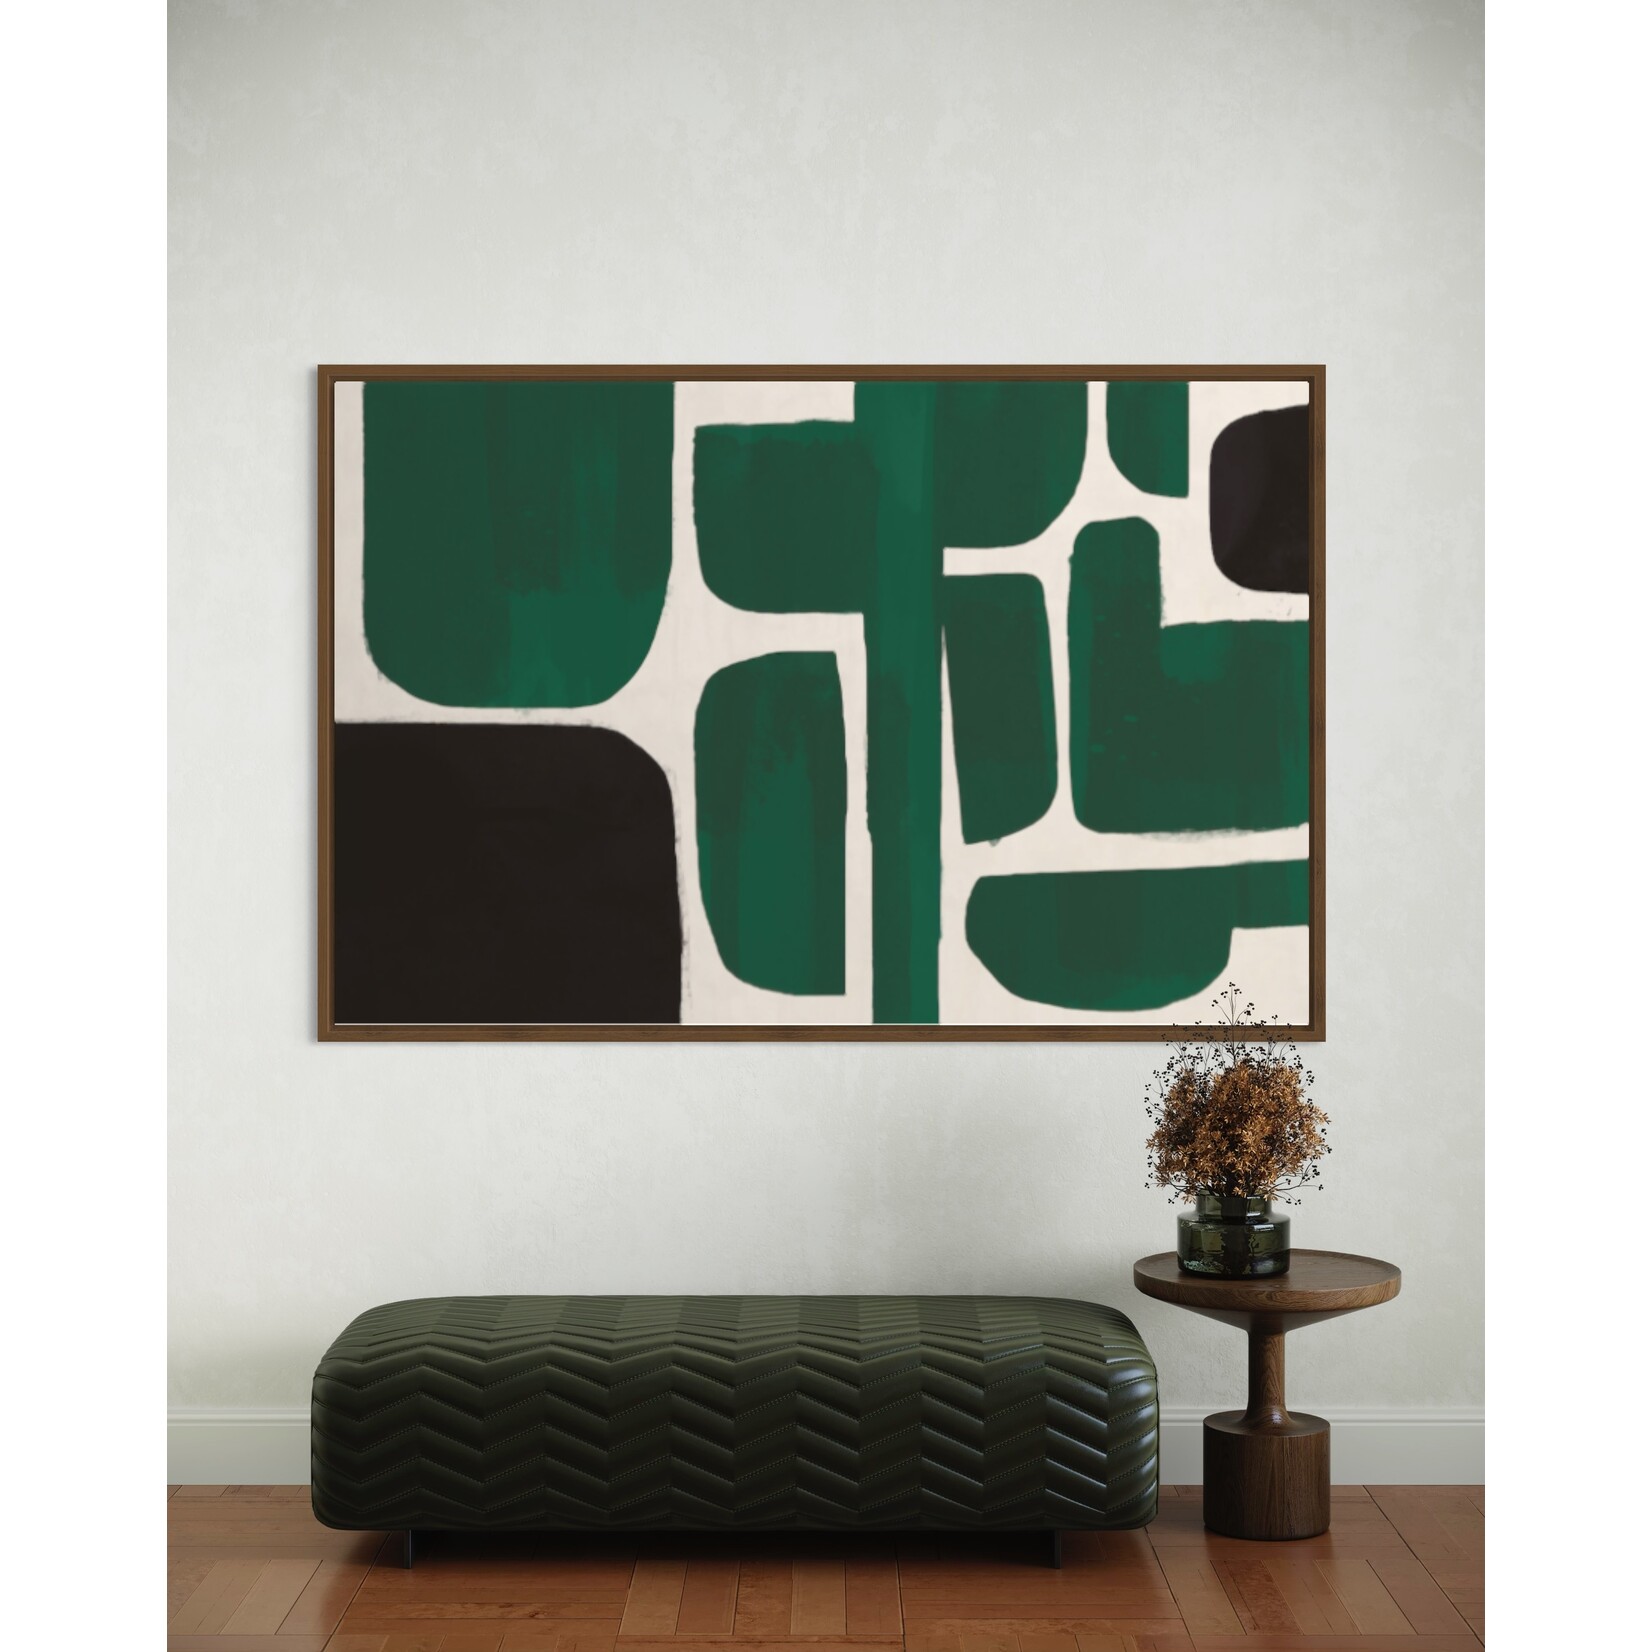 Stretched Print on Canvas Composicion in Green and Black by Alejandro Franseschini